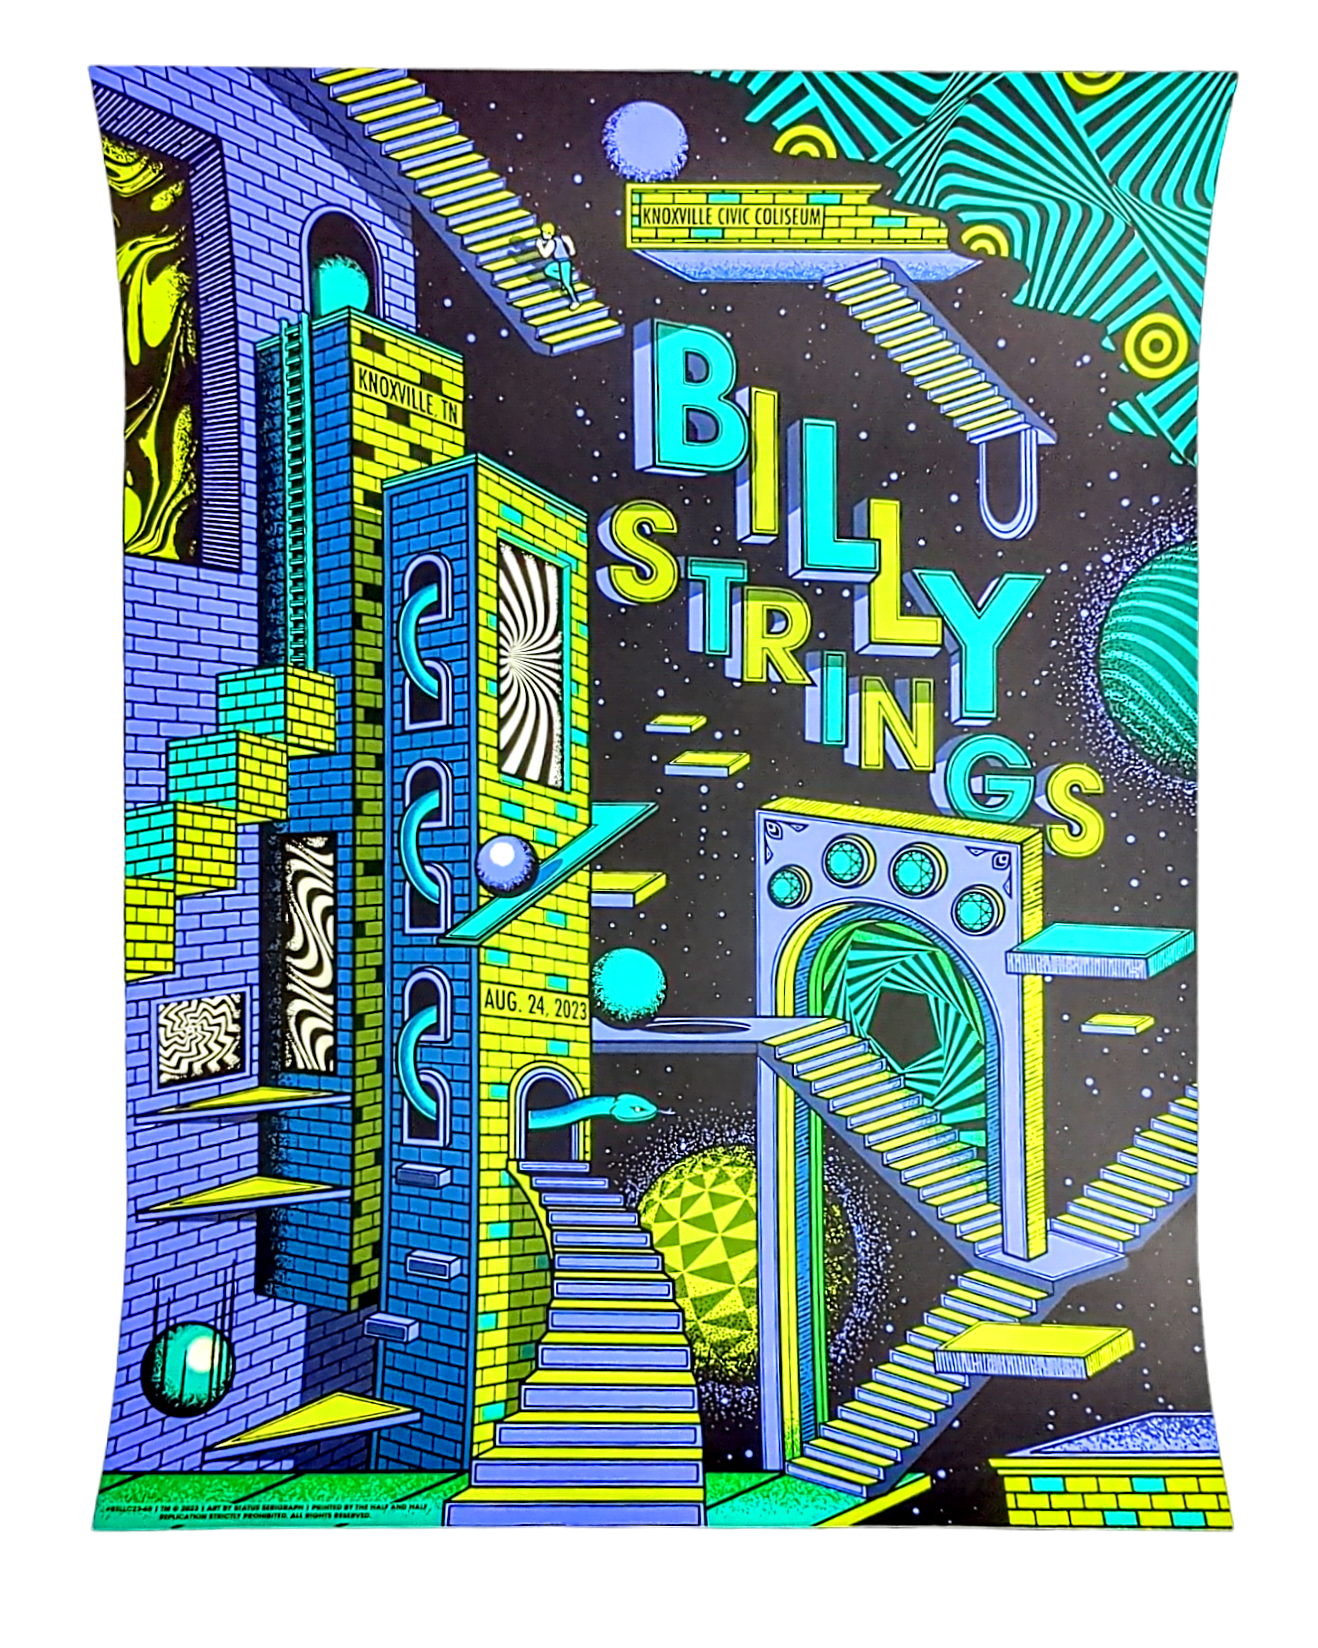 Status Serigraph (AKA Justin Helton) Billy Strings Knoxville Civic Coliseum Knoxville, Tennessee 8/24/23  Show Print 18 x 24 in Edition of 465